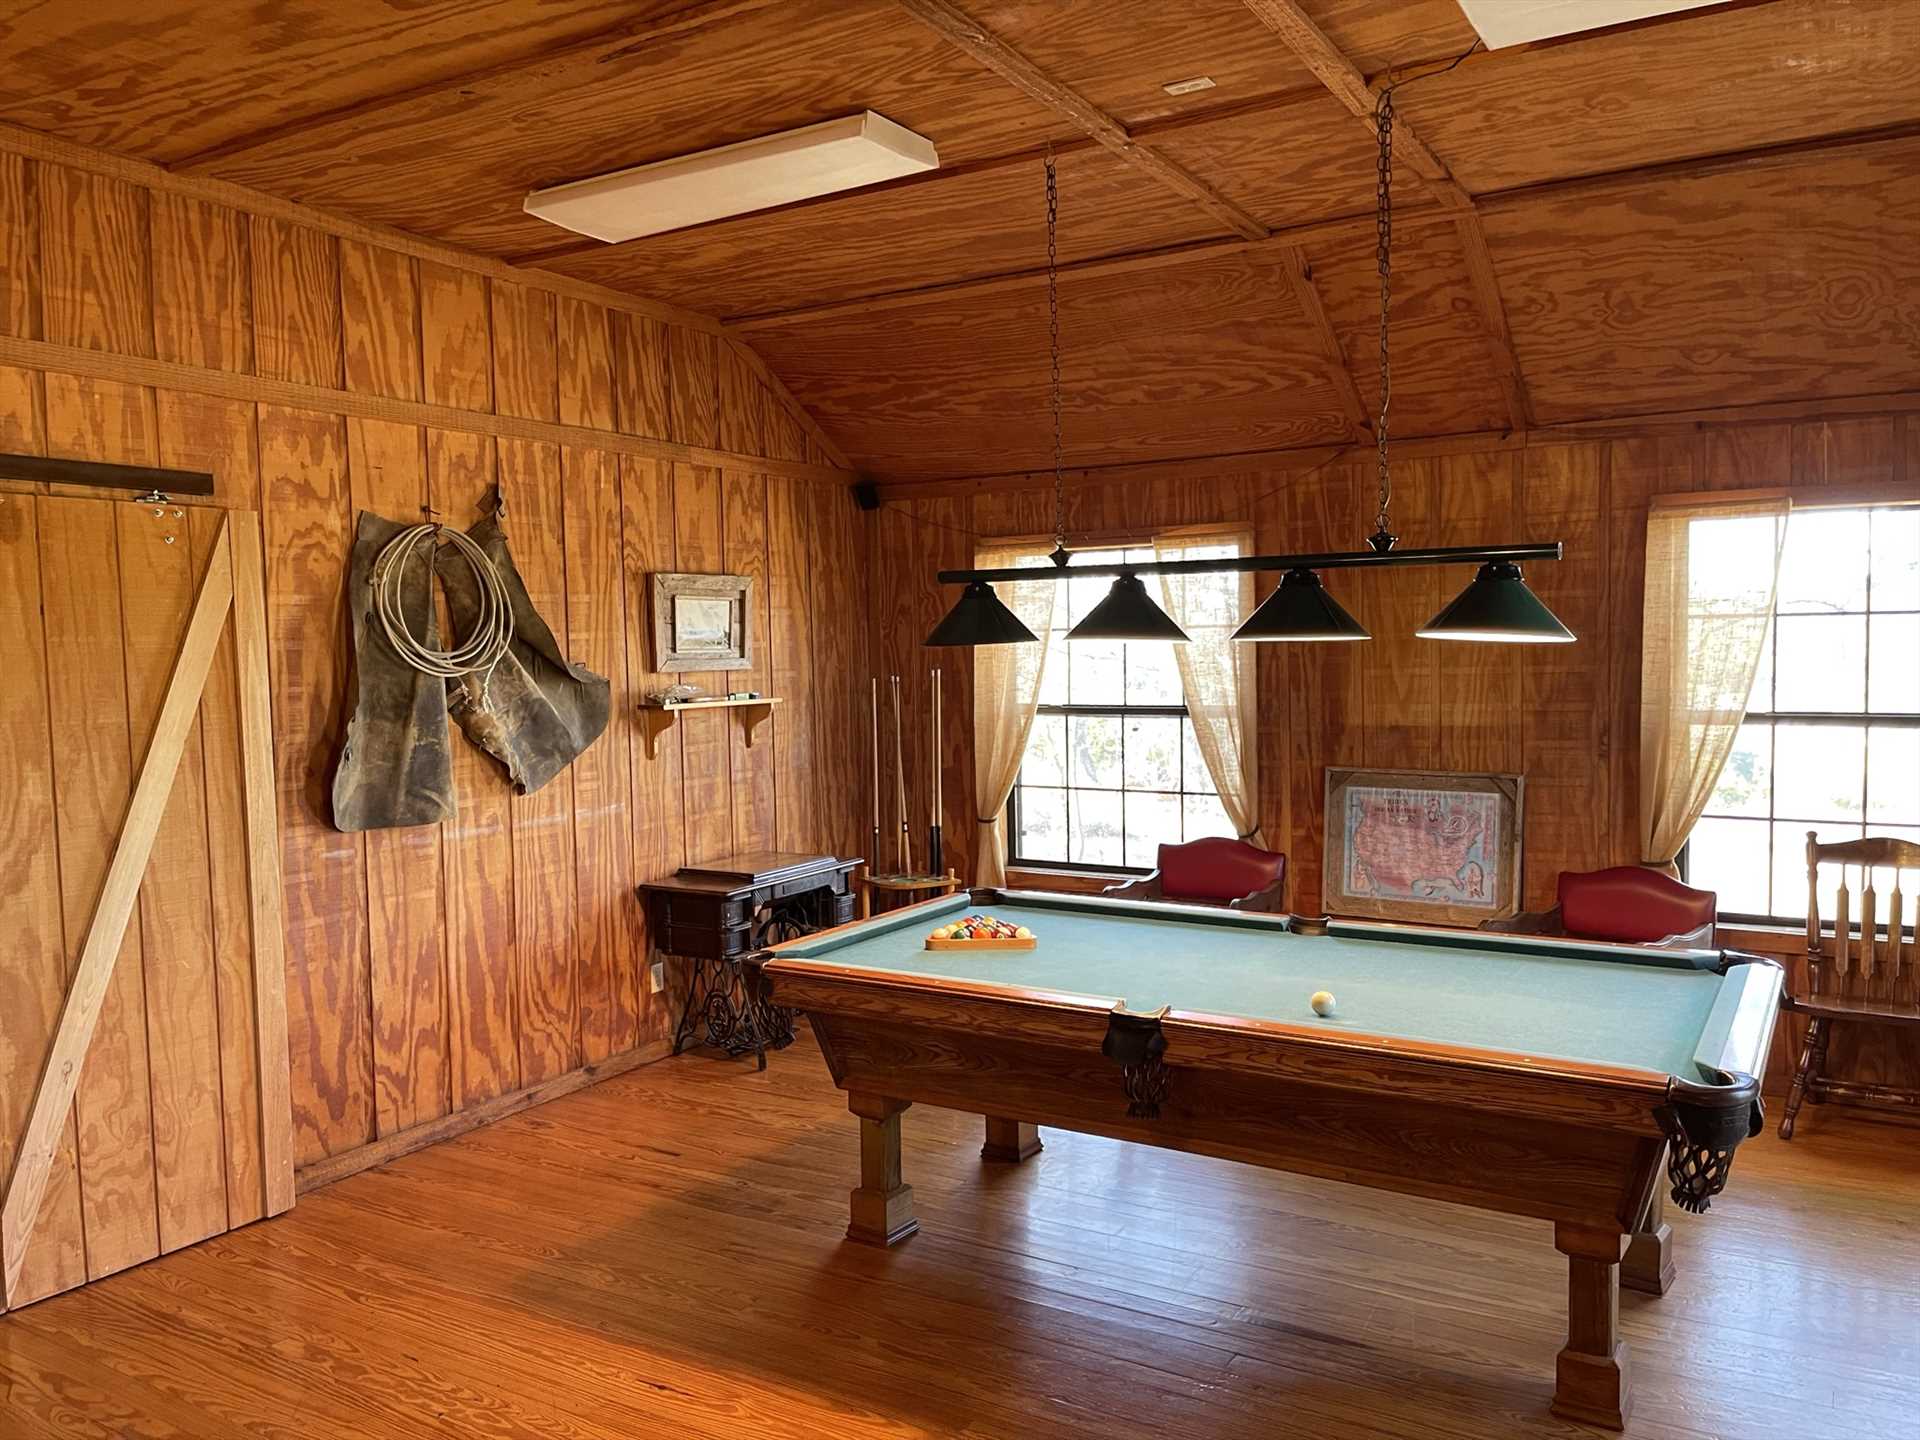                                                 Chalk up a cue and test your skills at the Lodge's vintage pocket-style pool table!